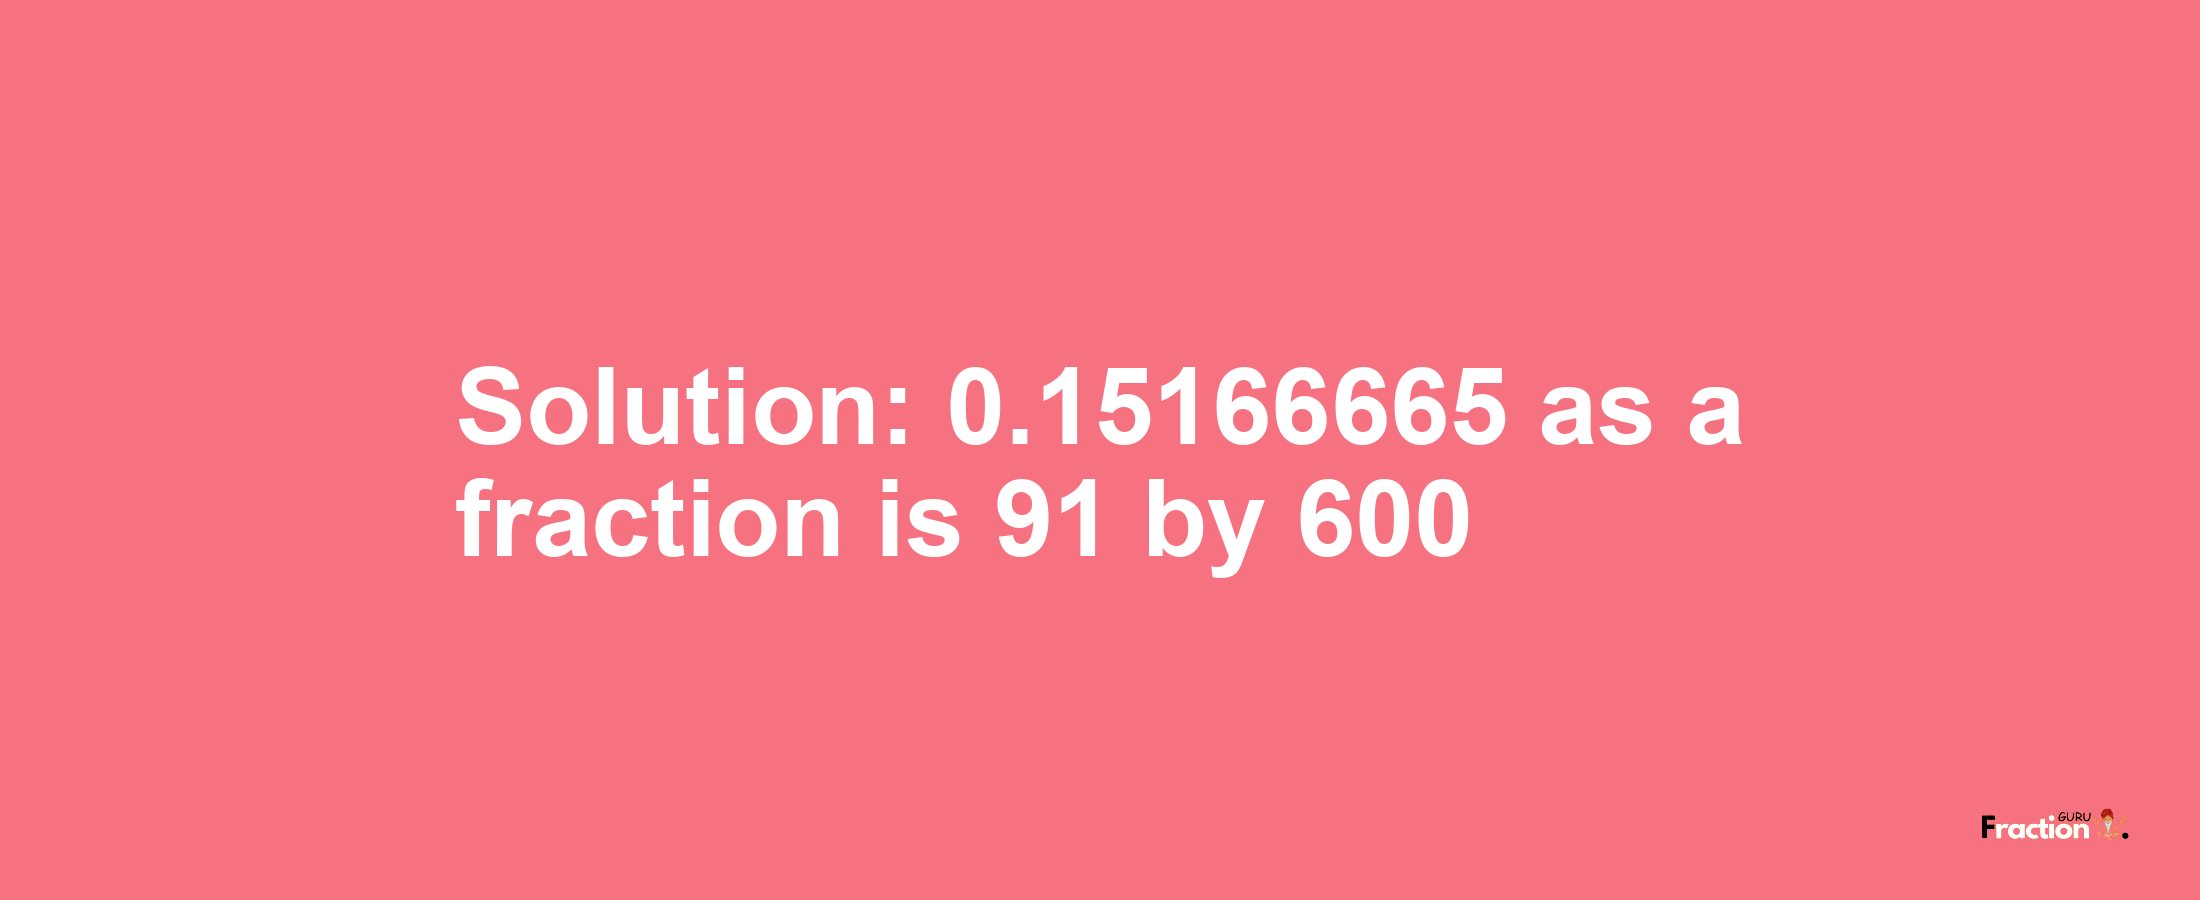 Solution:0.15166665 as a fraction is 91/600